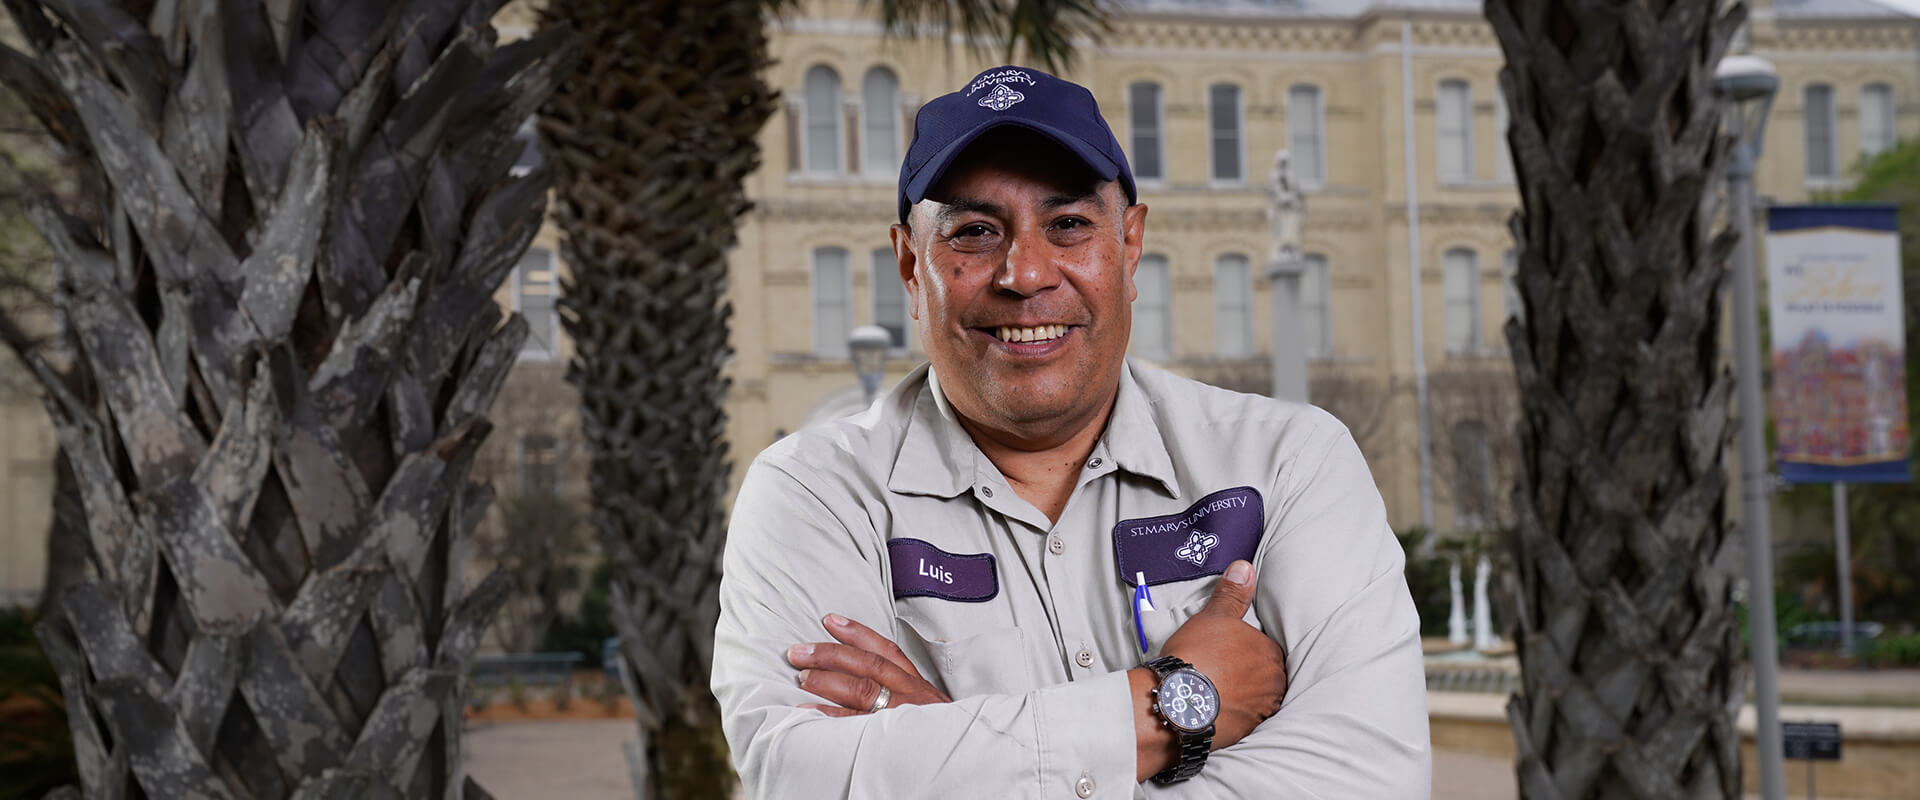 St. Mary's gardener Luis Sanchez smiles in front St. Louis Hall while wearing his work uniform